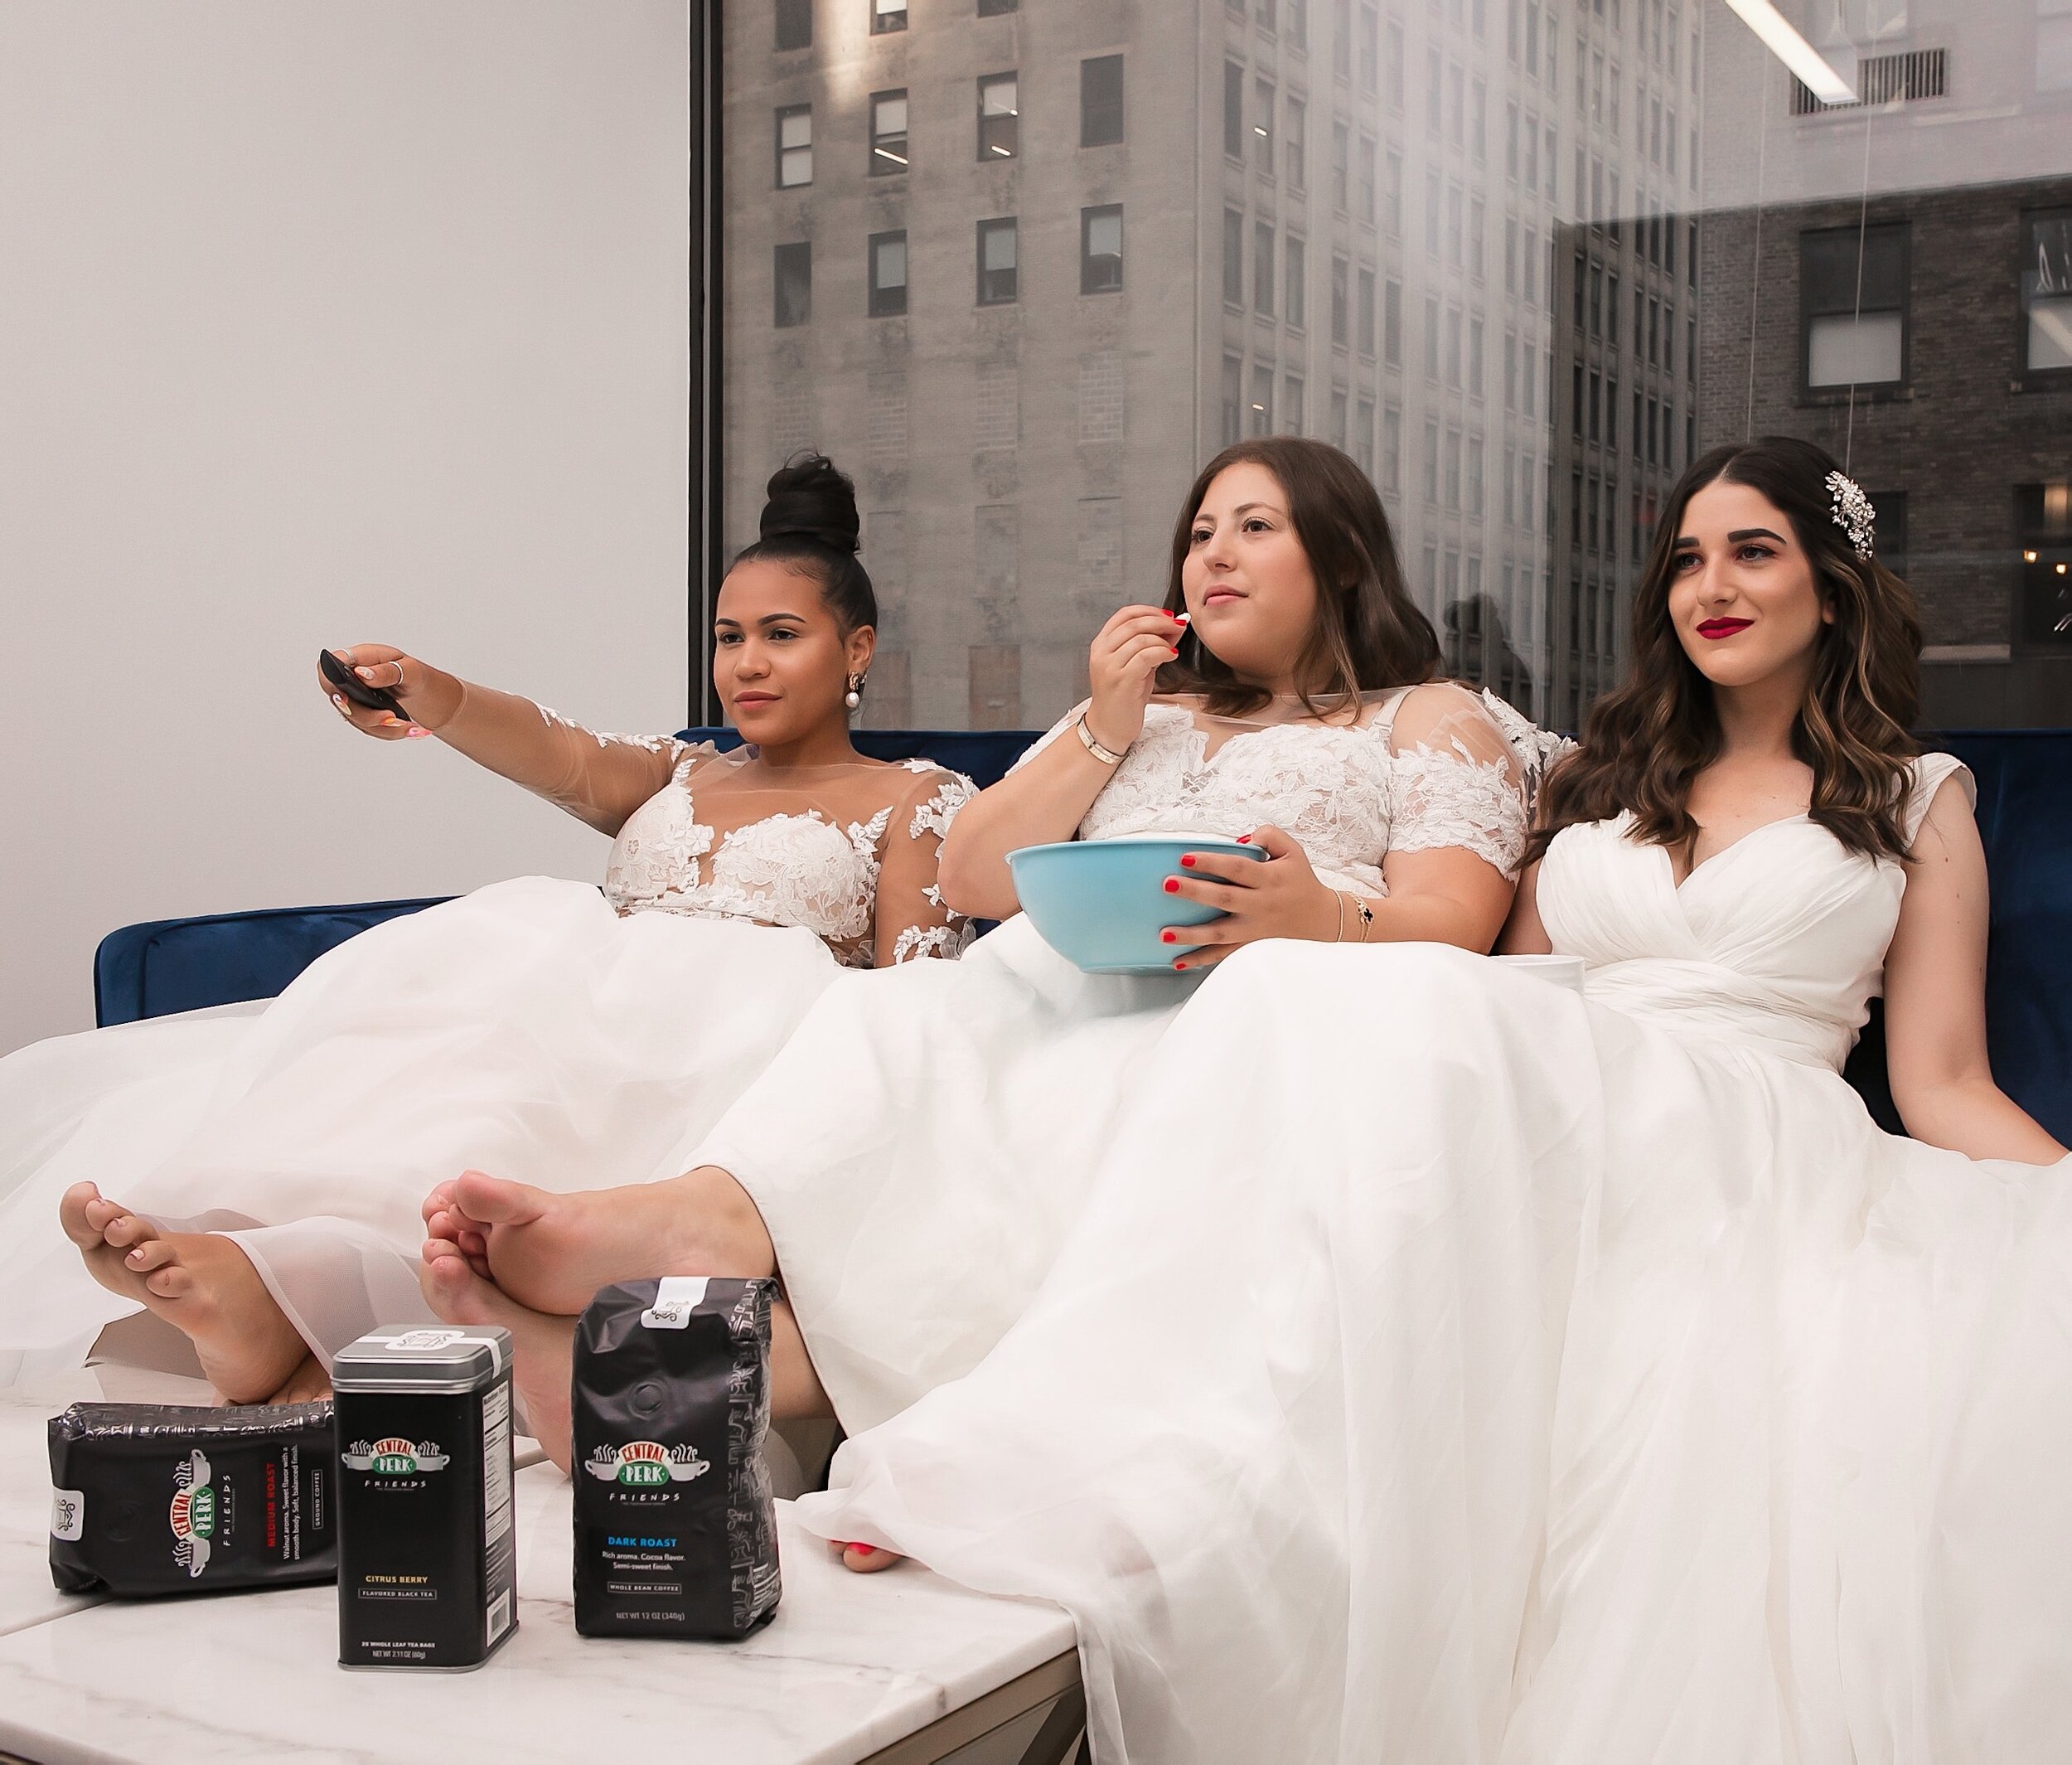 Recreating A Scene From Friends How To Plan A Group Photoshoot Esther Santer NYC Blogging Photoshoot Wedding Dresses Gowns White Rachel Monica Phoebe Popcorn Coffee Movie Night Funny Cosplay Bridal Hair Pretty Beautiful Girls Women Beer Style Trend.JPG